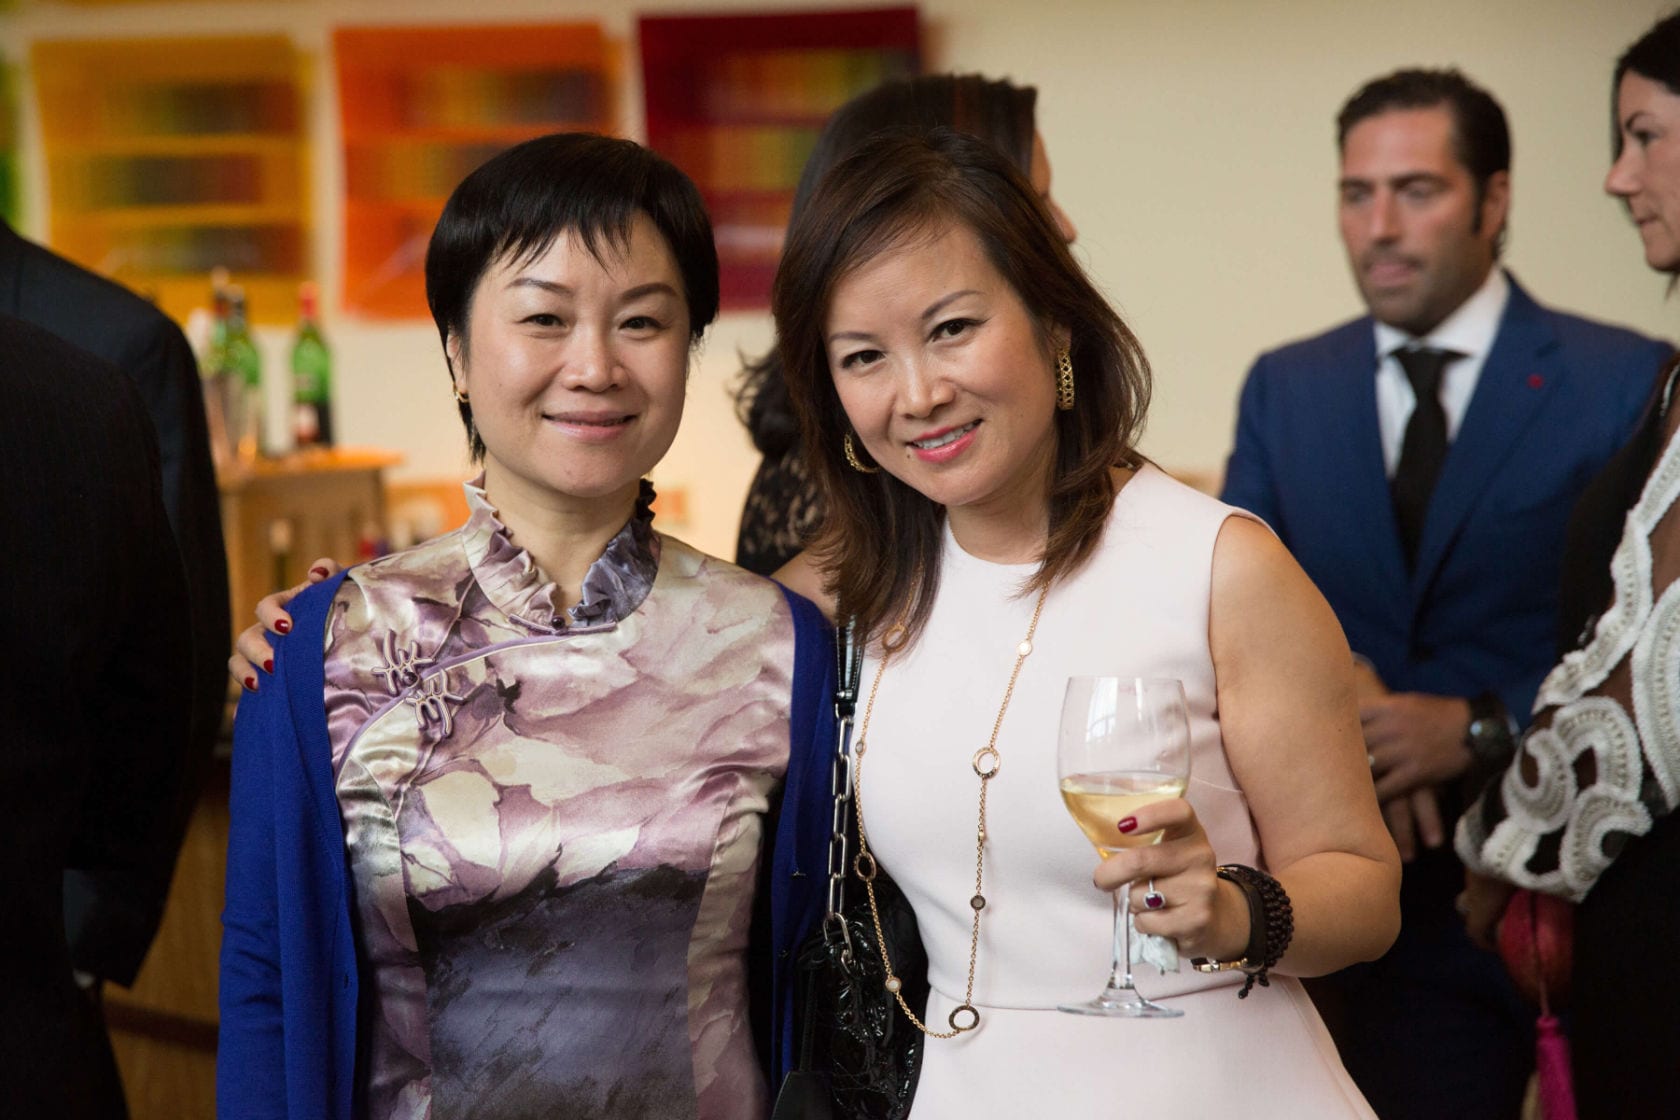 Business partners and sisters Li and Mei at the twentieth anniversary celebration of Chesapeake By (2014).